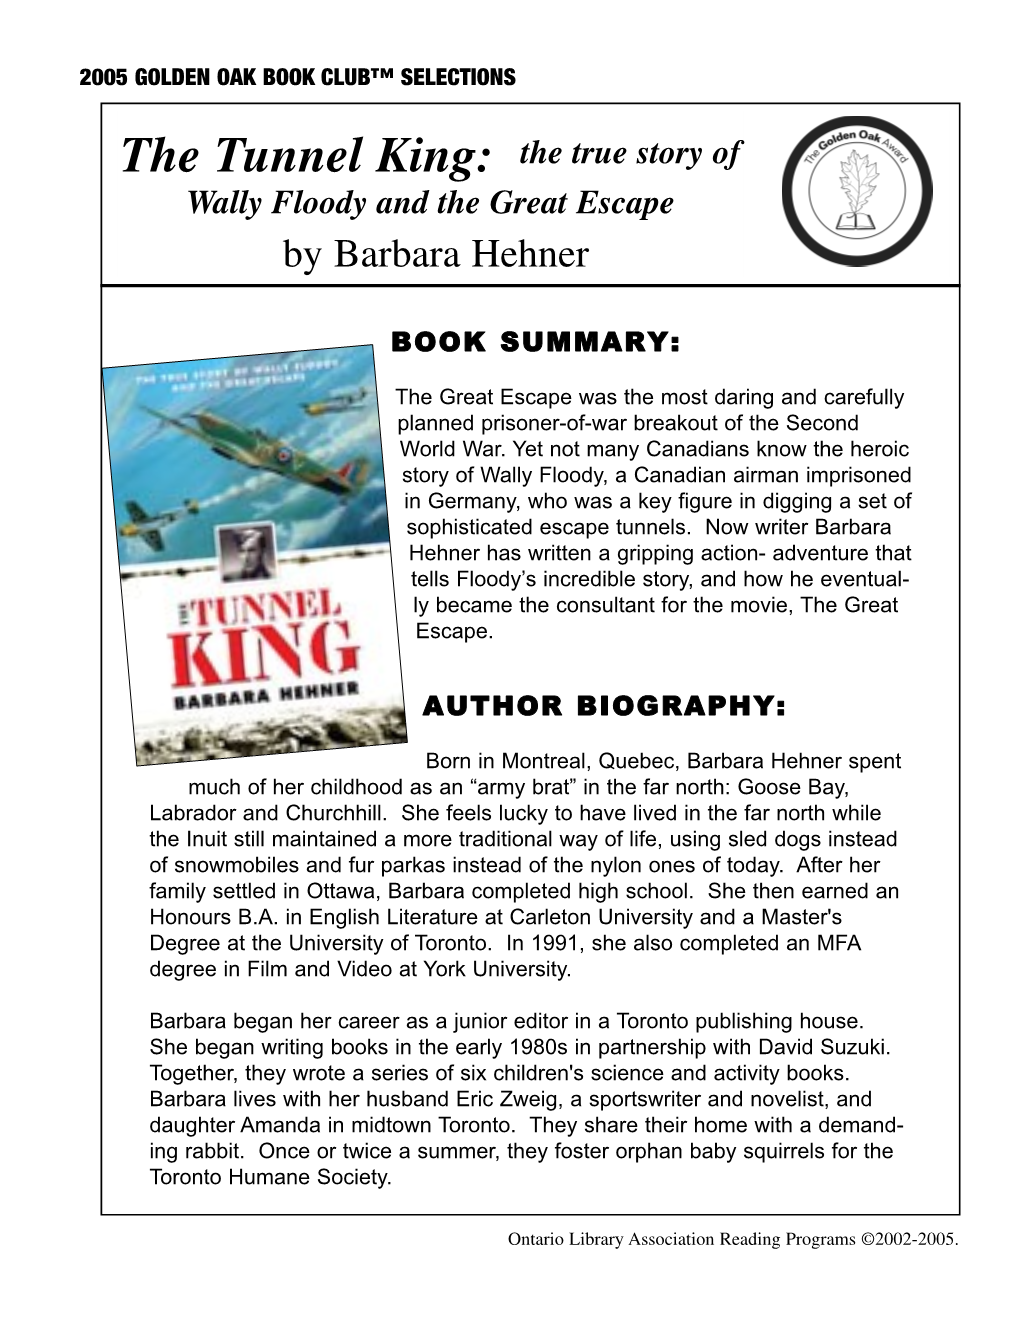 The Tunnel King: the True Story of Wally Floody and the Great Escape by Barbara Hehner